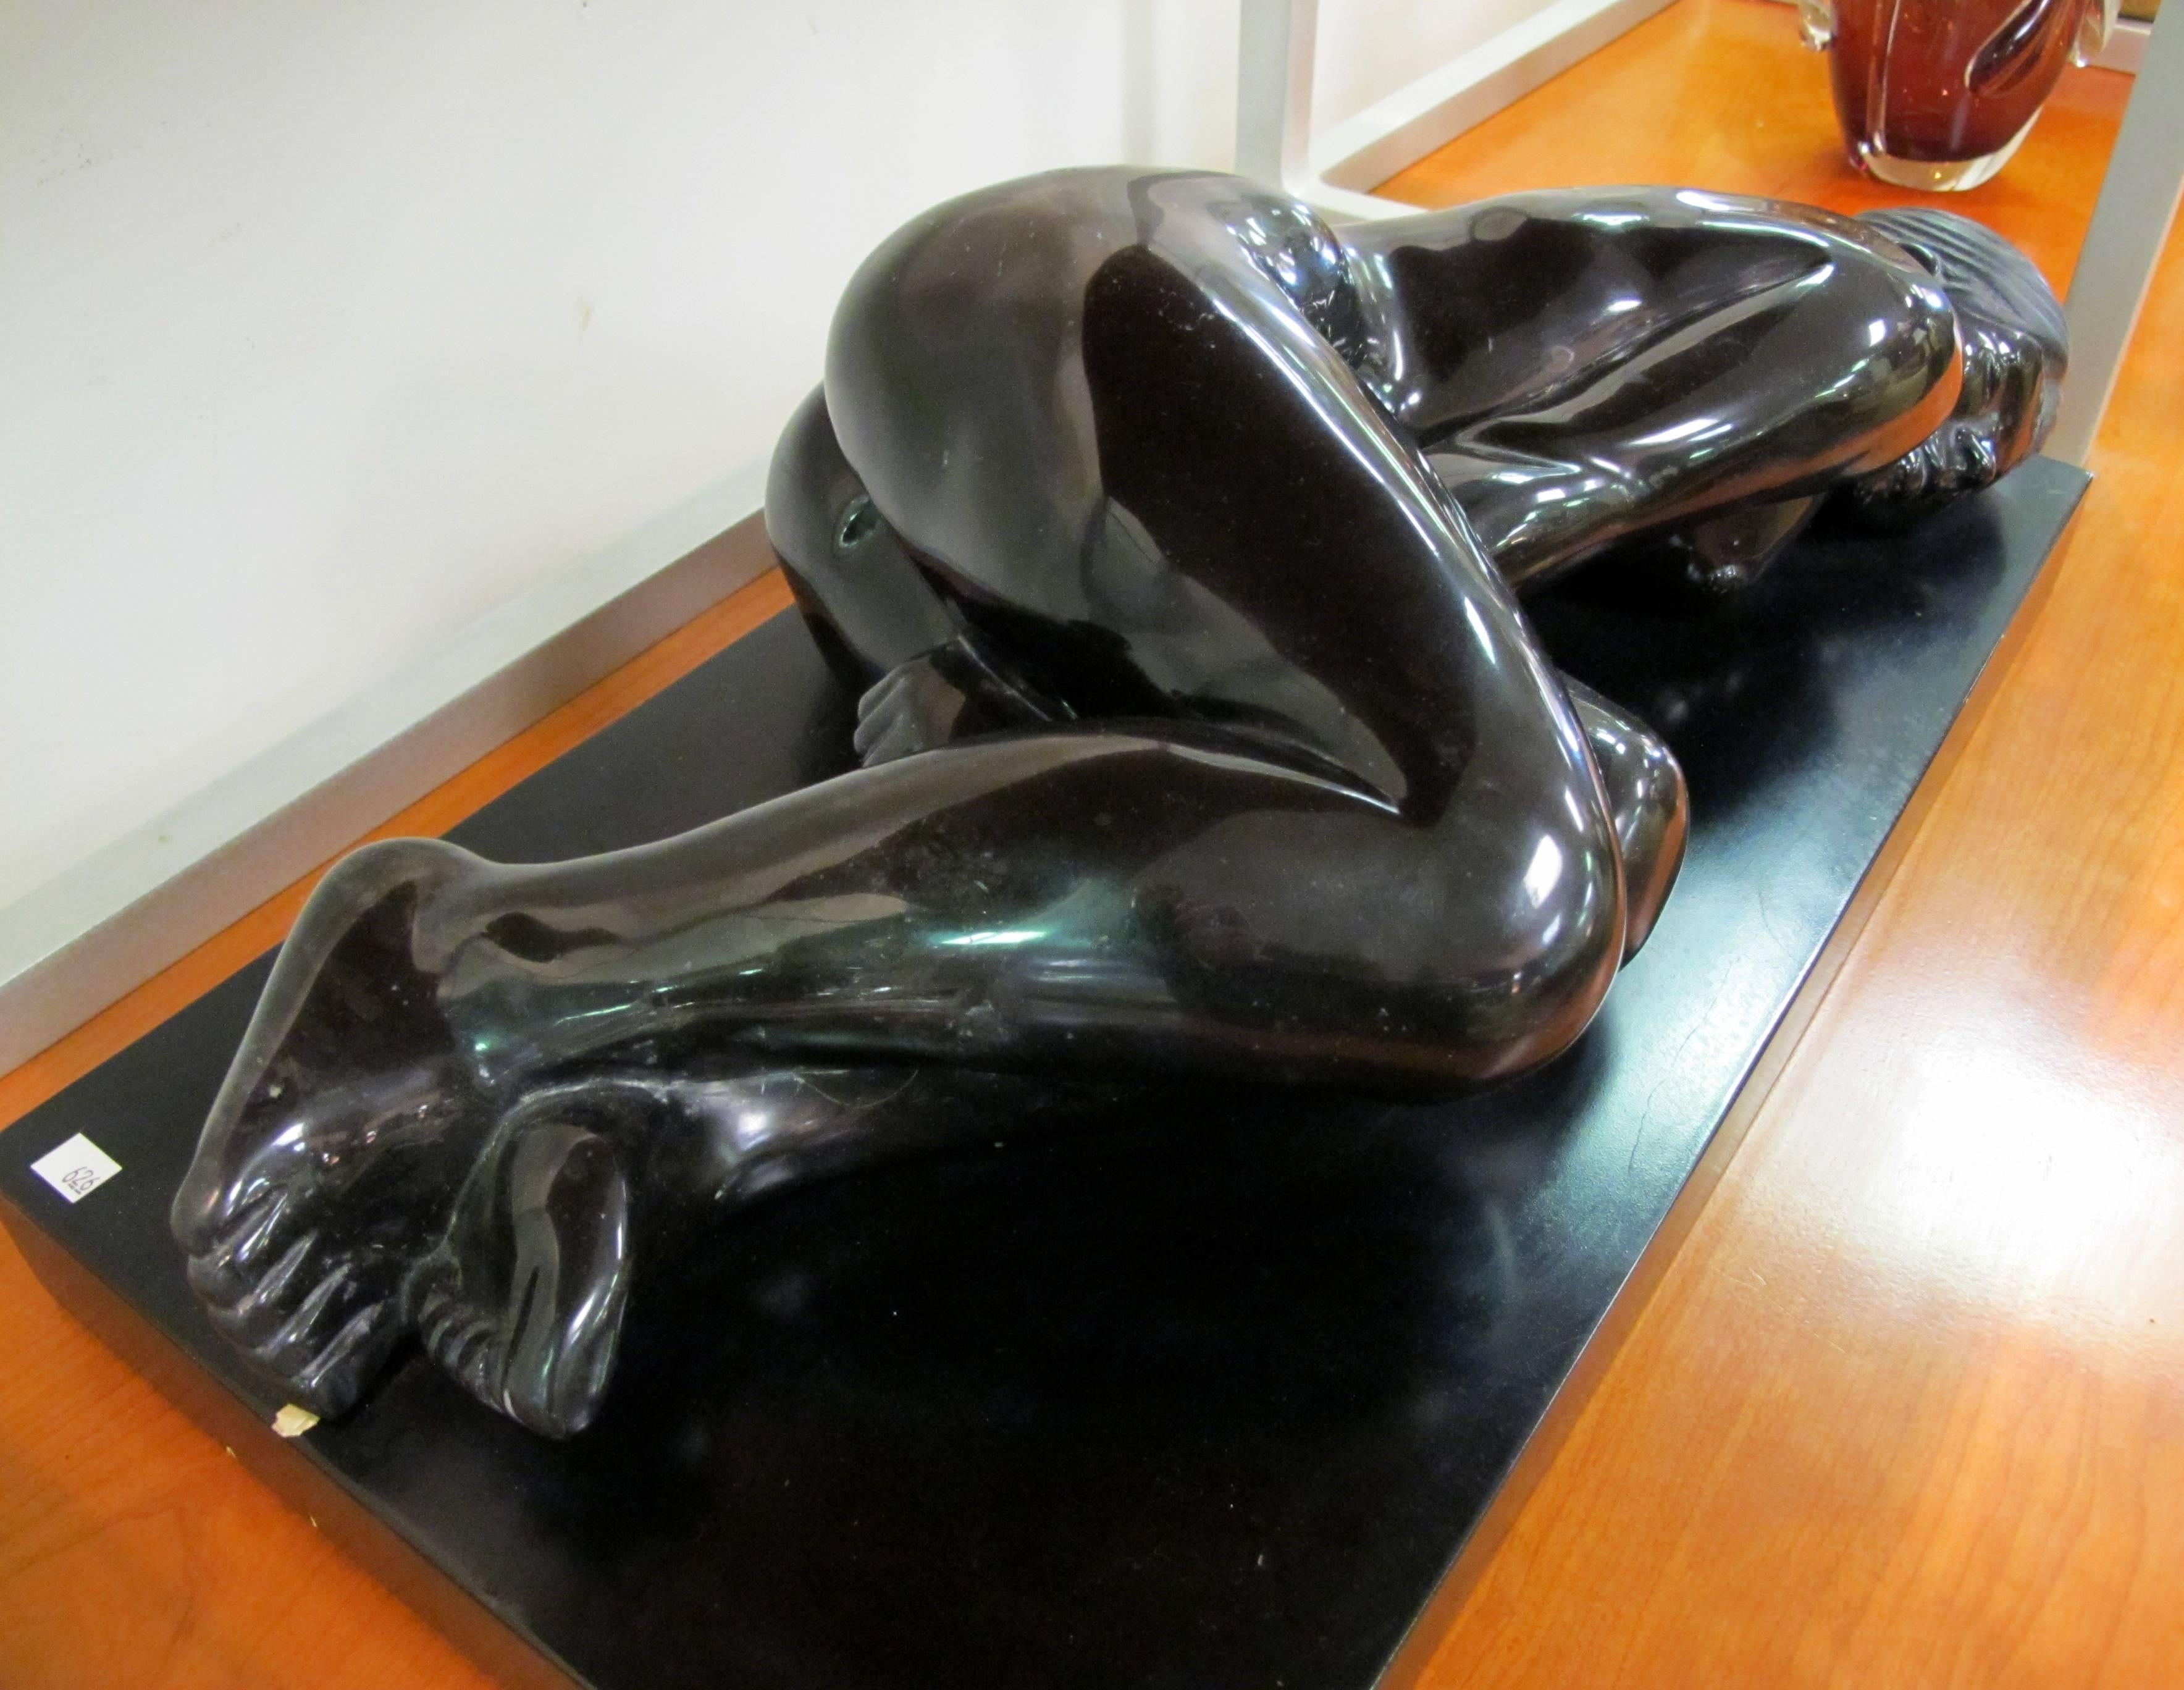 Black marble female figure by Mexican artist Gustavo Nequiz. Purchased in New Orleans, this beautiful sculpture is 7